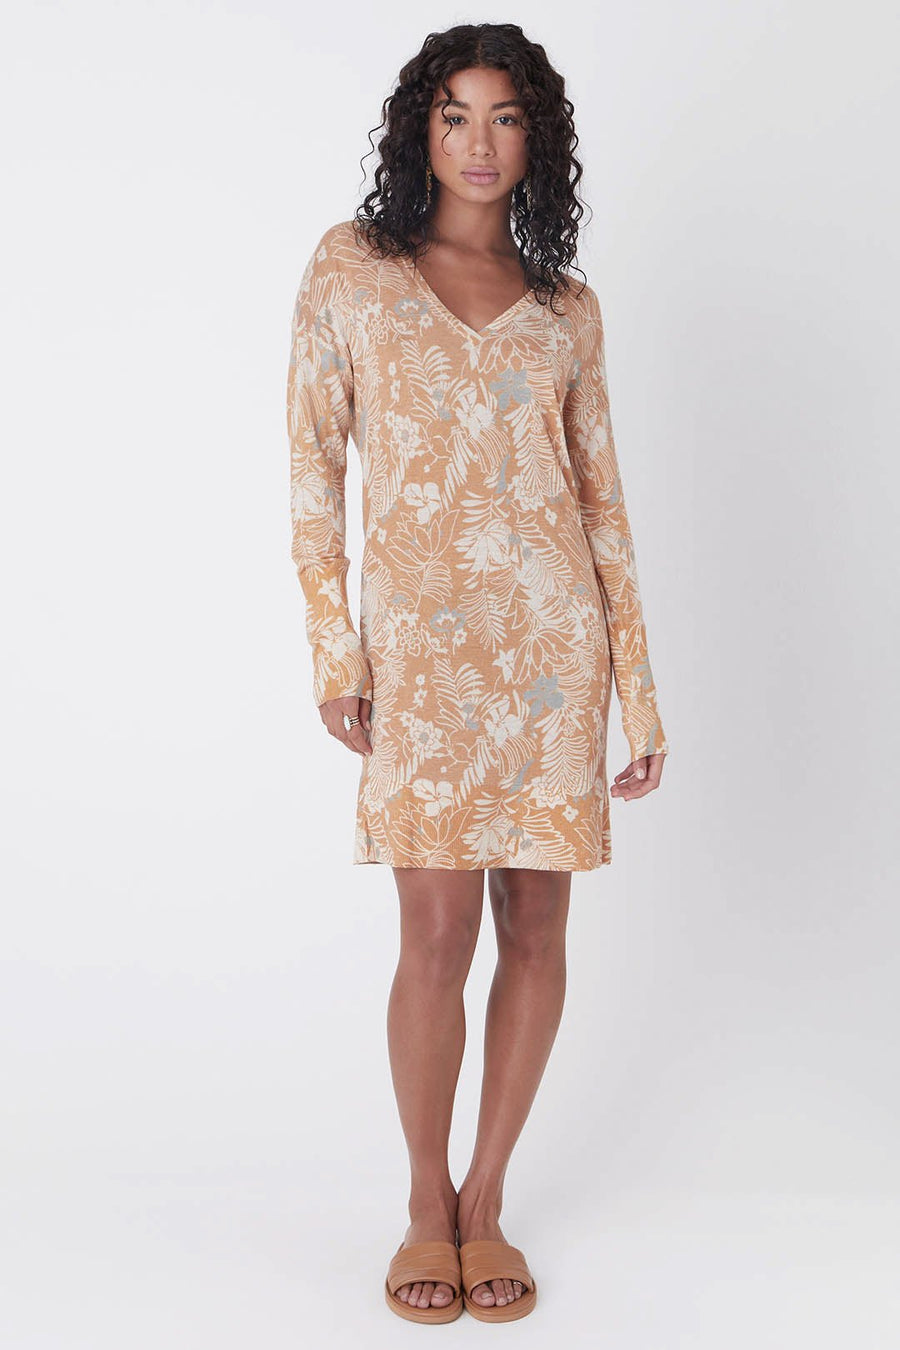 KIMIKO DRESS, TROPICAL - Burning Torch Online Boutique